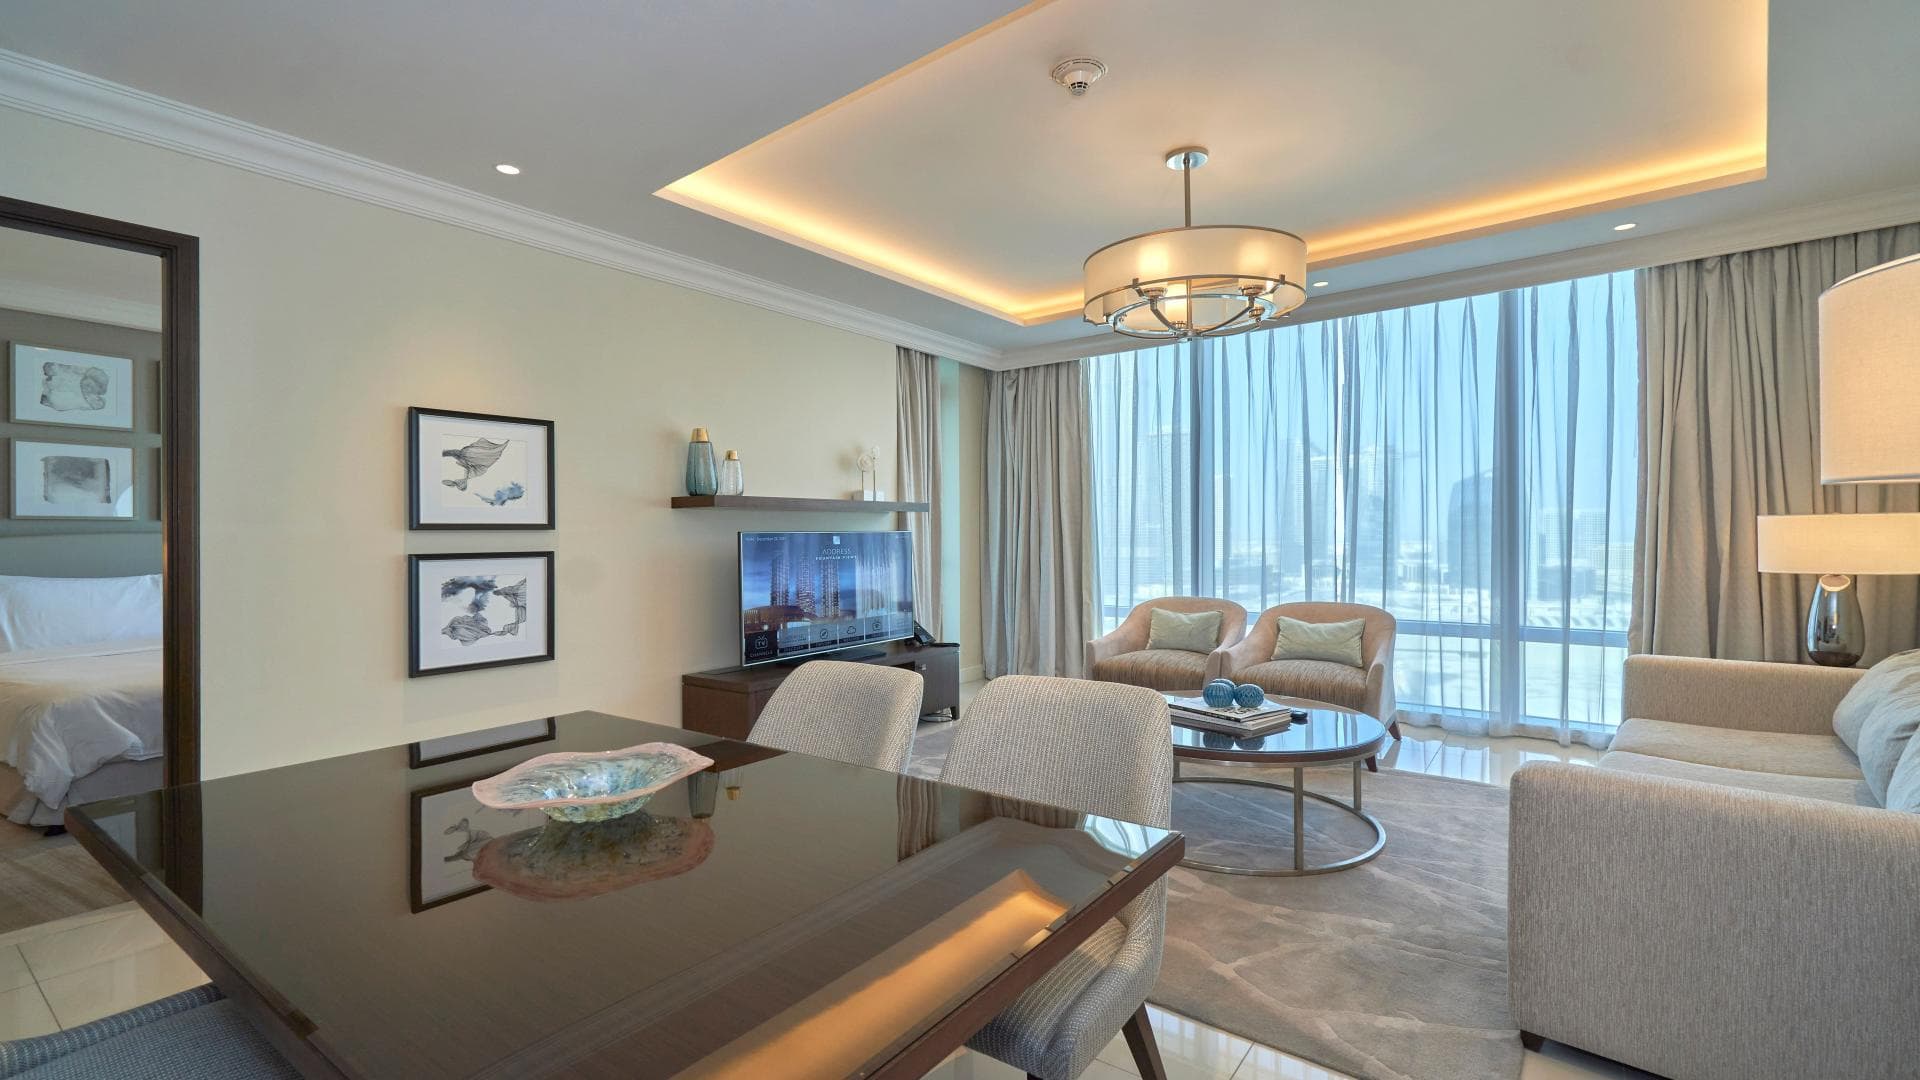 1 Bedroom Apartment For Sale Marina View Tower B Lp36869 13c3f93036055800.jpeg